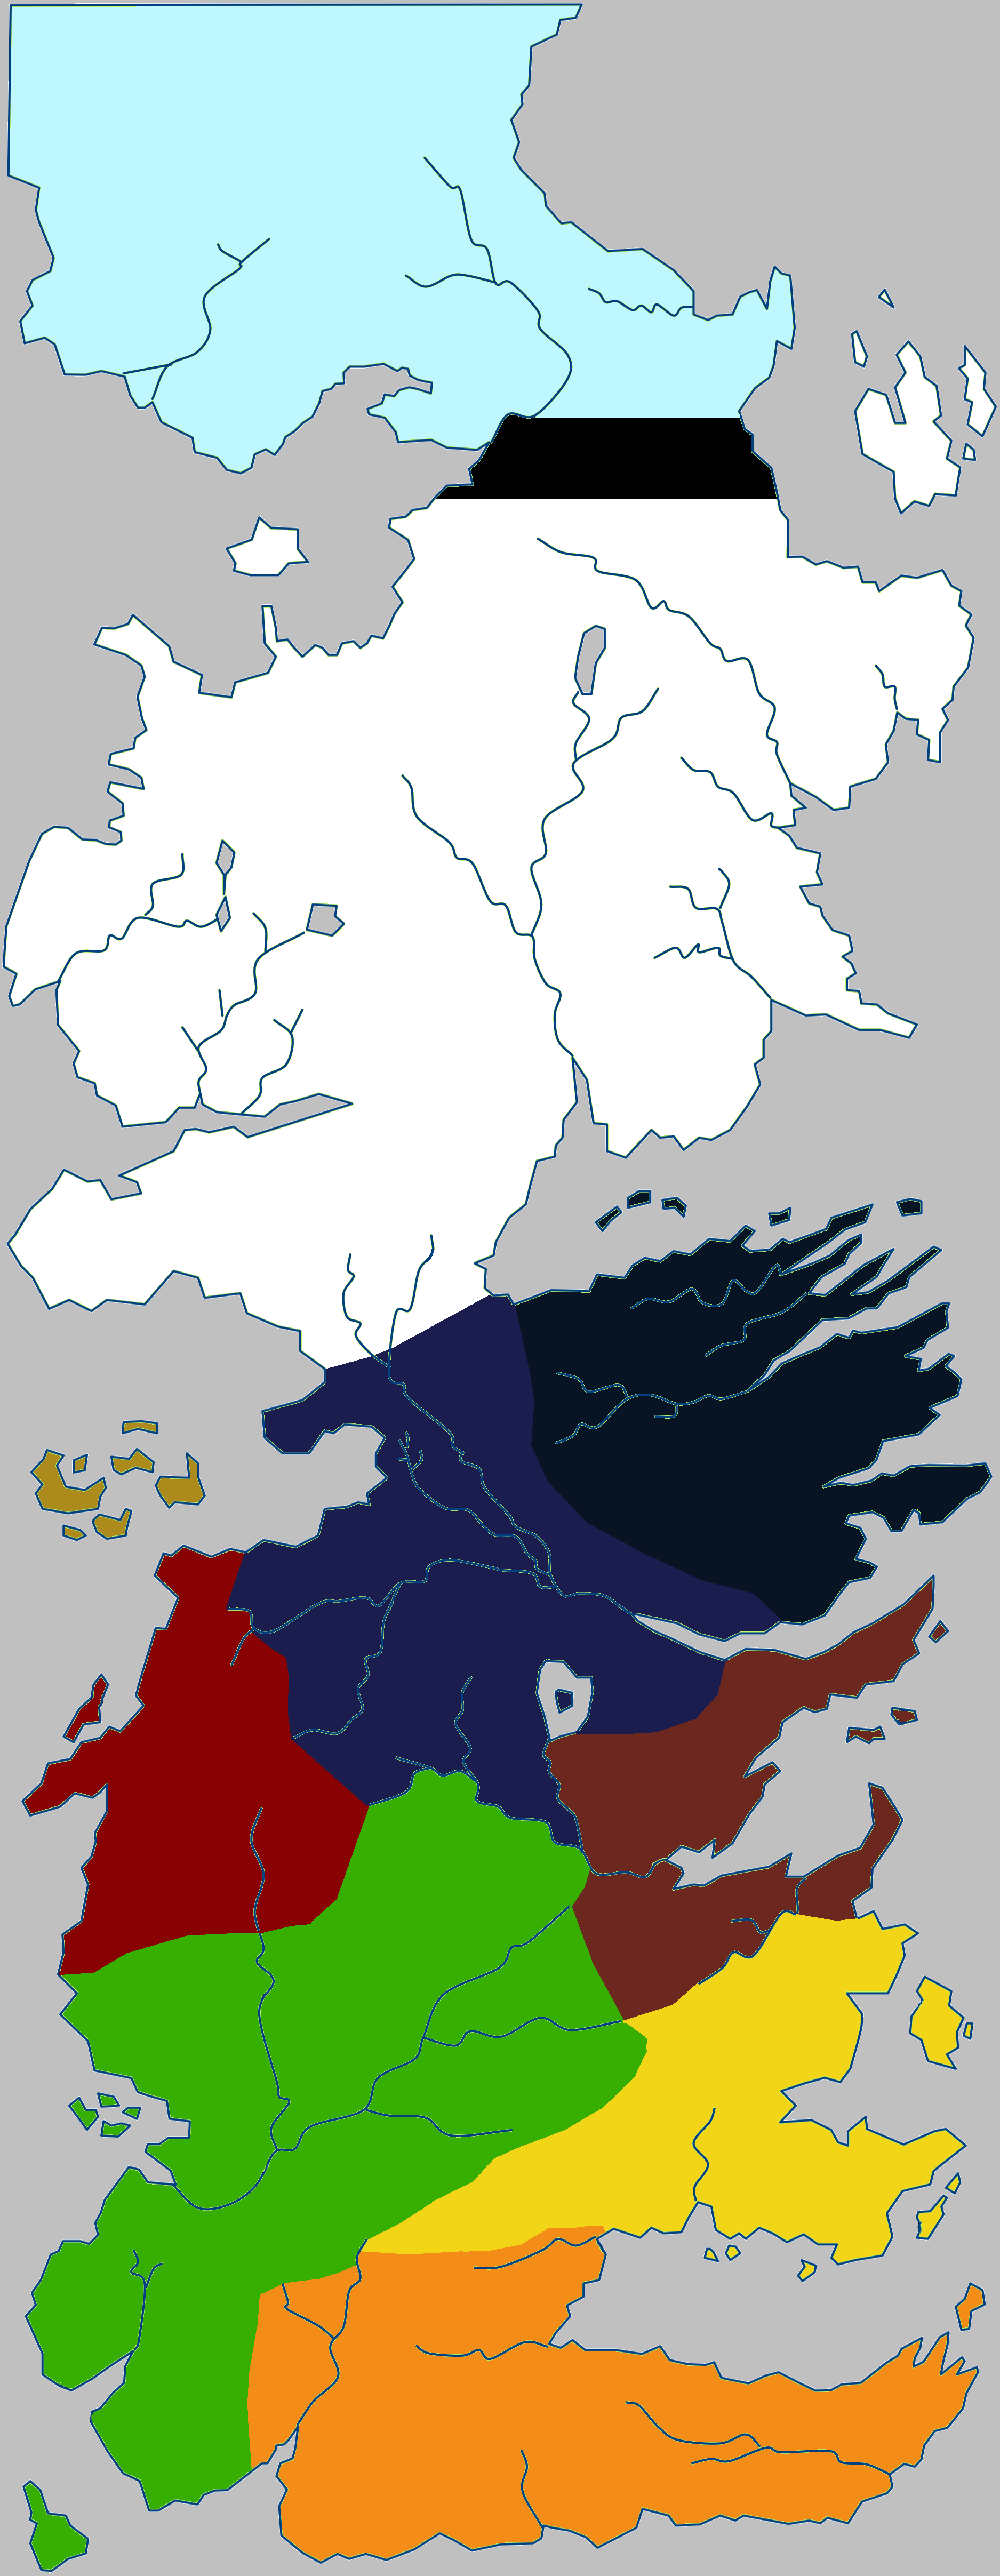 The Seven Kingdoms of Game of Thrones [Westeros]